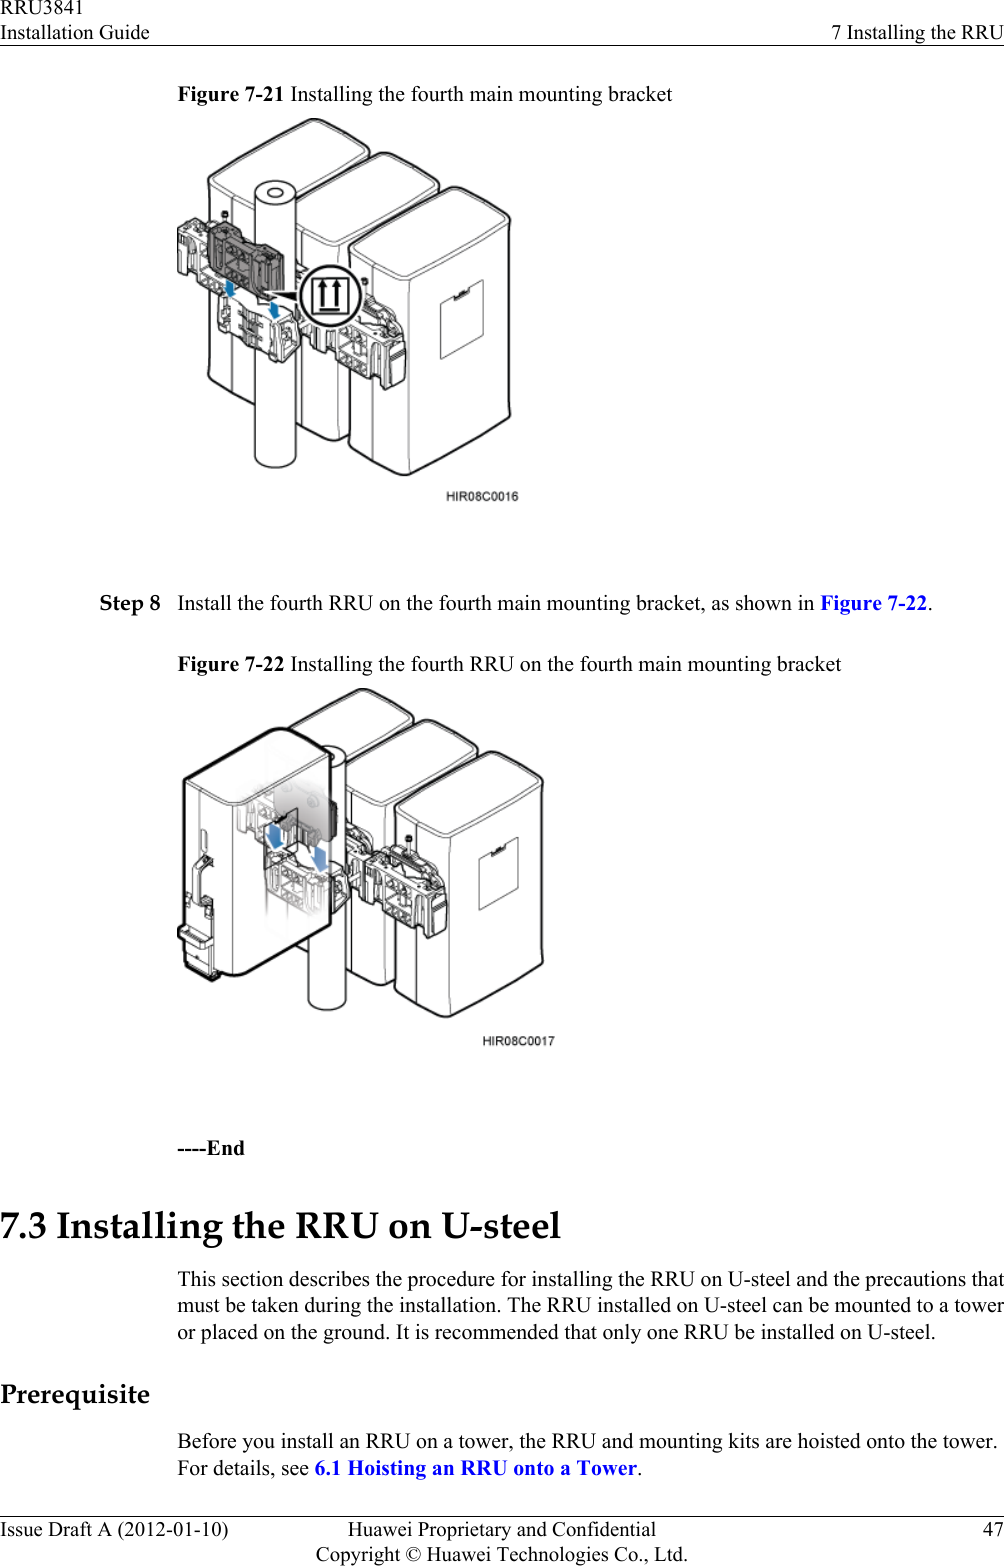 Figure 7-21 Installing the fourth main mounting bracket Step 8 Install the fourth RRU on the fourth main mounting bracket, as shown in Figure 7-22.Figure 7-22 Installing the fourth RRU on the fourth main mounting bracket ----End7.3 Installing the RRU on U-steelThis section describes the procedure for installing the RRU on U-steel and the precautions thatmust be taken during the installation. The RRU installed on U-steel can be mounted to a toweror placed on the ground. It is recommended that only one RRU be installed on U-steel.PrerequisiteBefore you install an RRU on a tower, the RRU and mounting kits are hoisted onto the tower.For details, see 6.1 Hoisting an RRU onto a Tower.RRU3841Installation Guide 7 Installing the RRUIssue Draft A (2012-01-10) Huawei Proprietary and ConfidentialCopyright © Huawei Technologies Co., Ltd.47